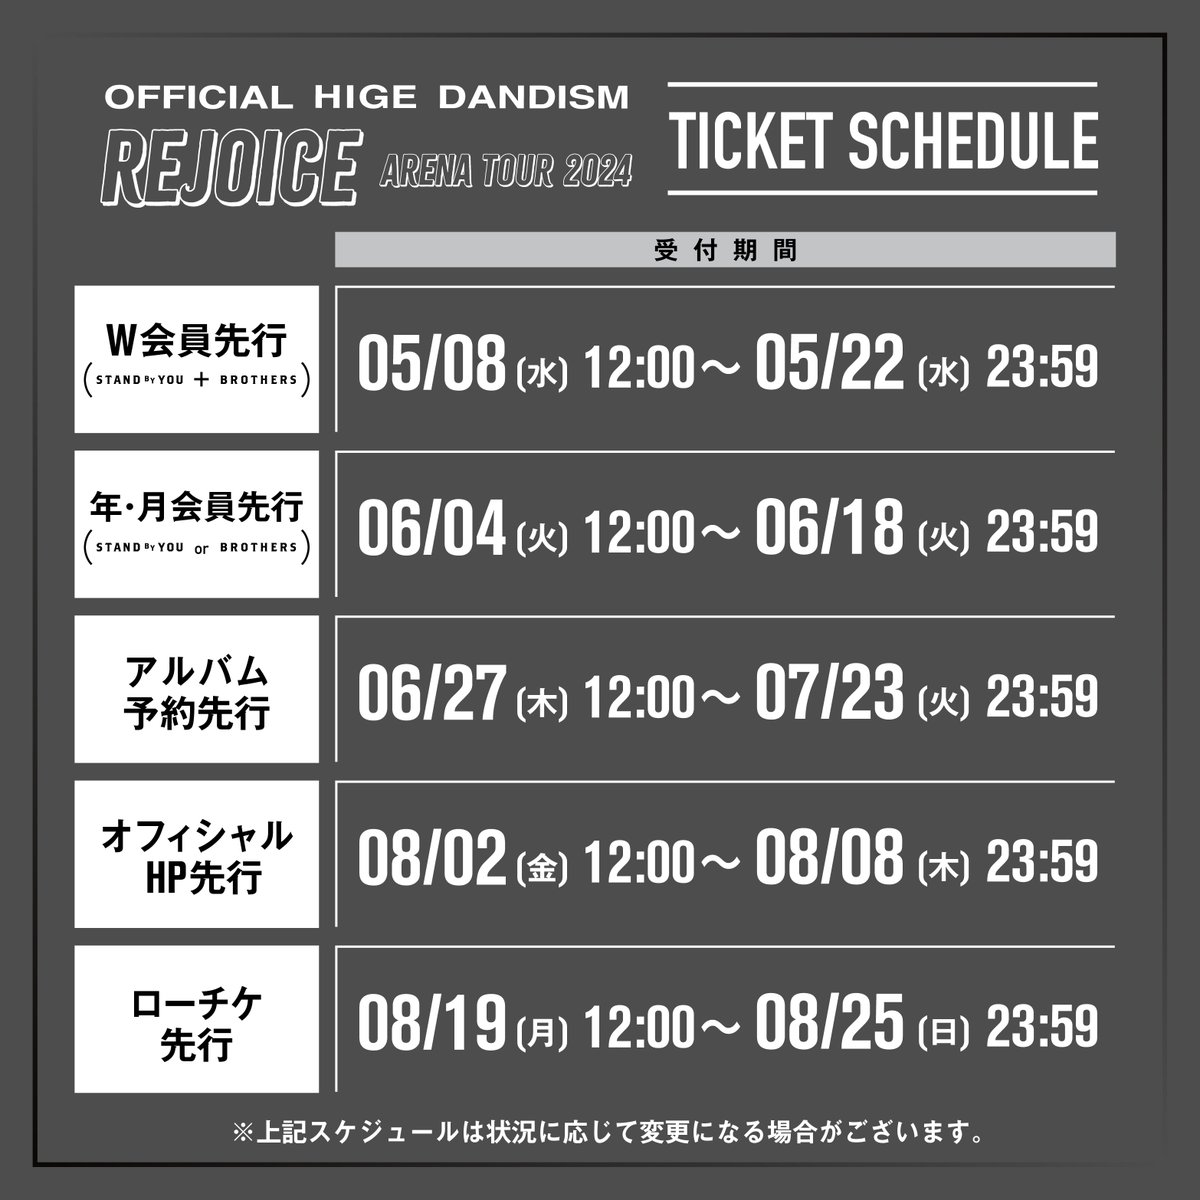 OFFICIAL HIGE DANDISM
Arena Tour 2024 - Rejoice -

🎫W会員先行受付開始のお知らせ

▼受付期間
5/8(水) 12:00 〜 5/22(水) 23:59

▼お申し込みは特設サイト
「TICKET」をご確認ください。
event.higedan.com/feature/live_2…

#ヒゲダンアリーナツアー